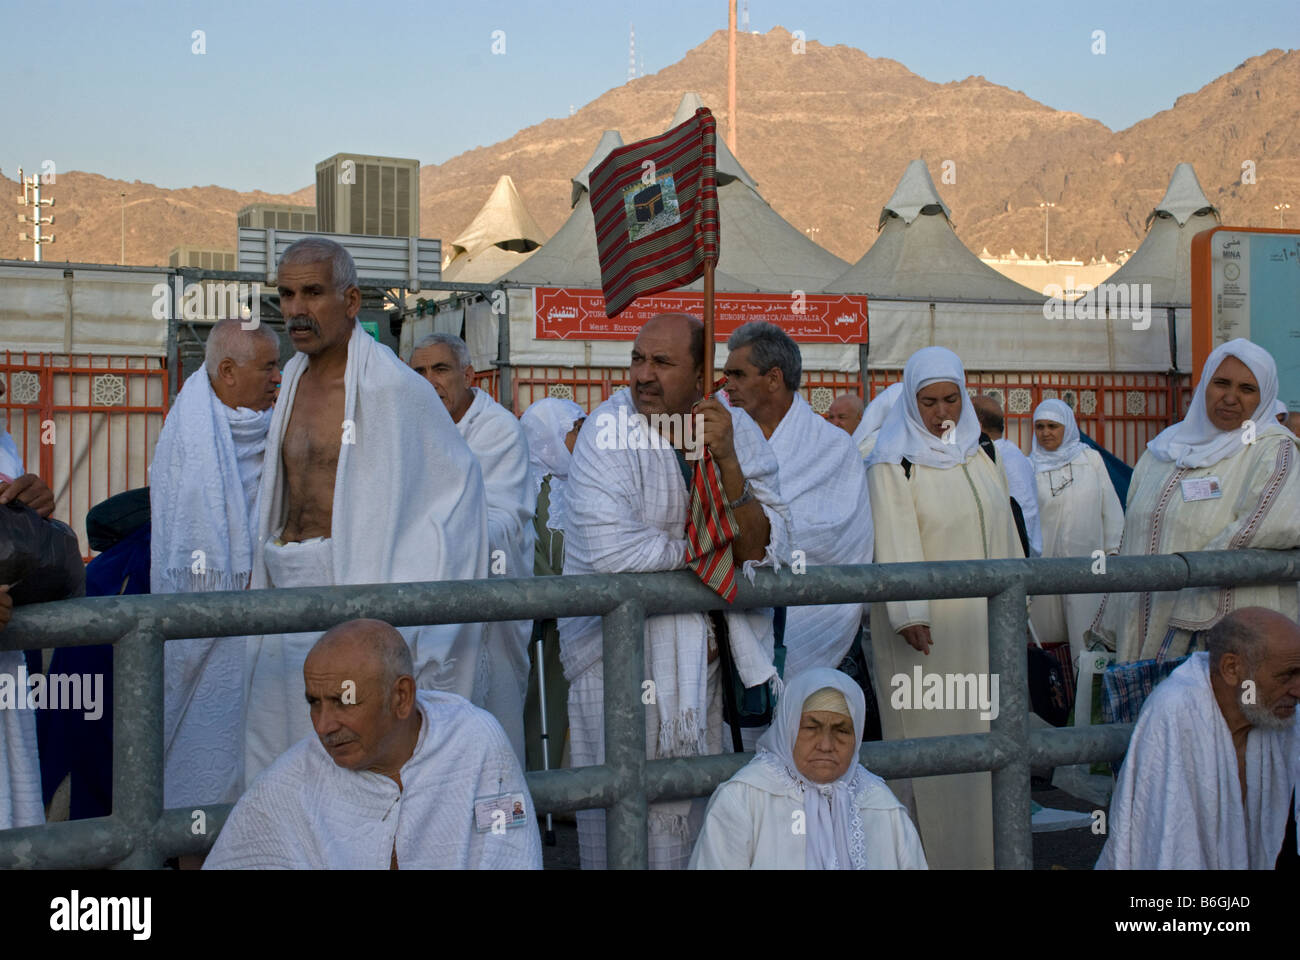 Muslim pilgrim waiving with a banner showing other members of his group where he is standing Makkah Saudi Arabia Stock Photo